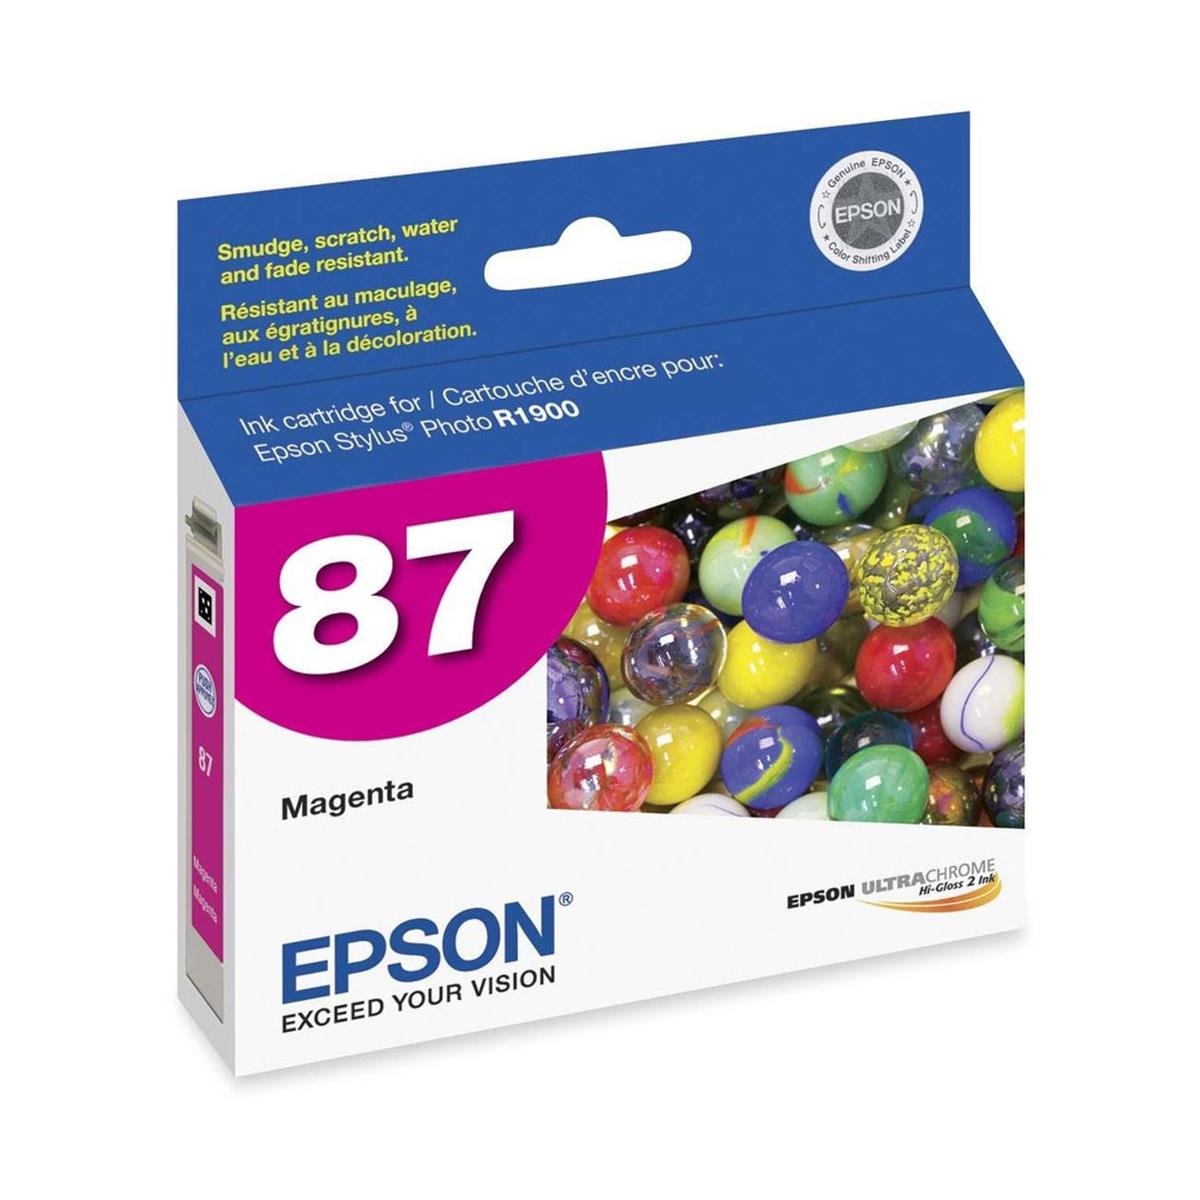 Image of Epson T087320 Cartridge for Stylus R1900